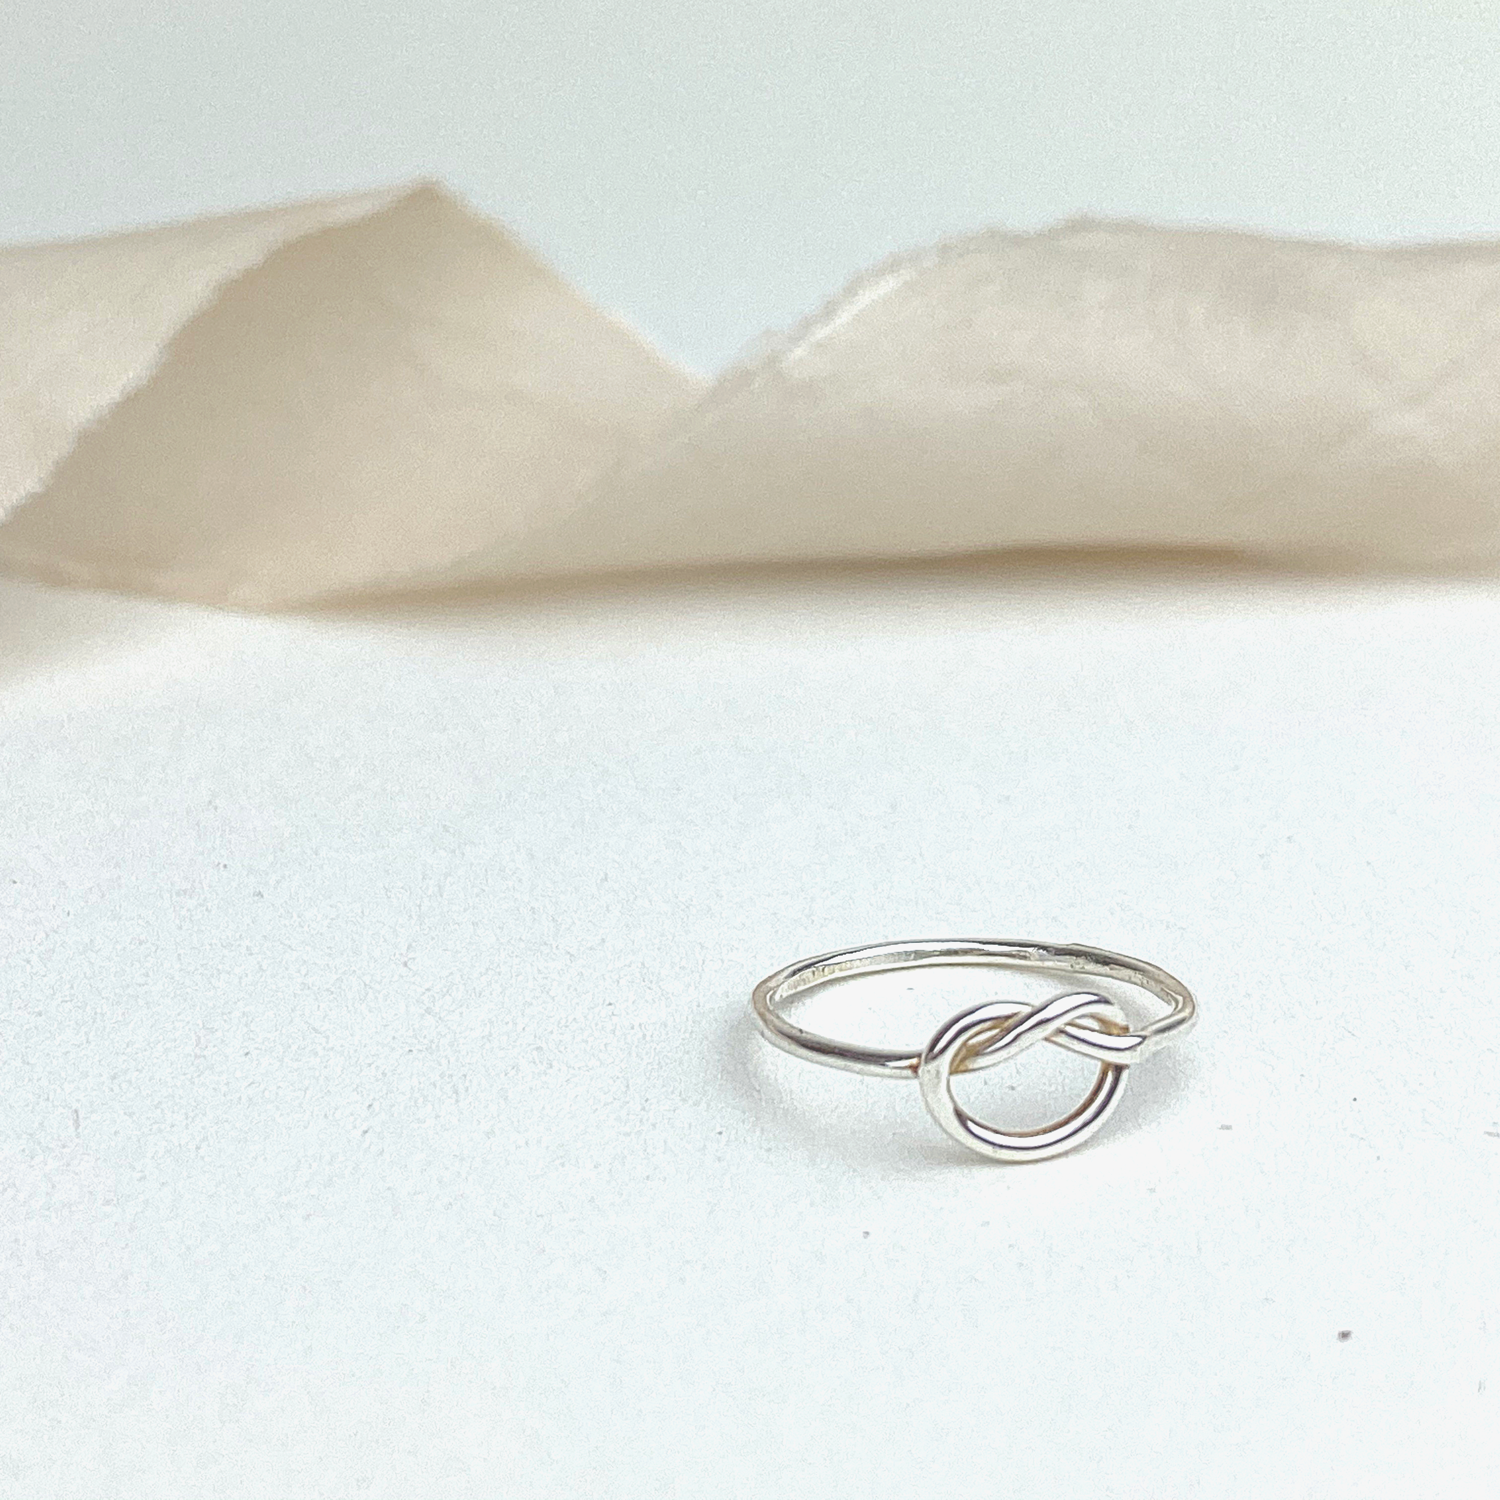 The Meg Knot Ring - sterling silver skinny ring - wedding and bridesmaid gift - handtied knot ring